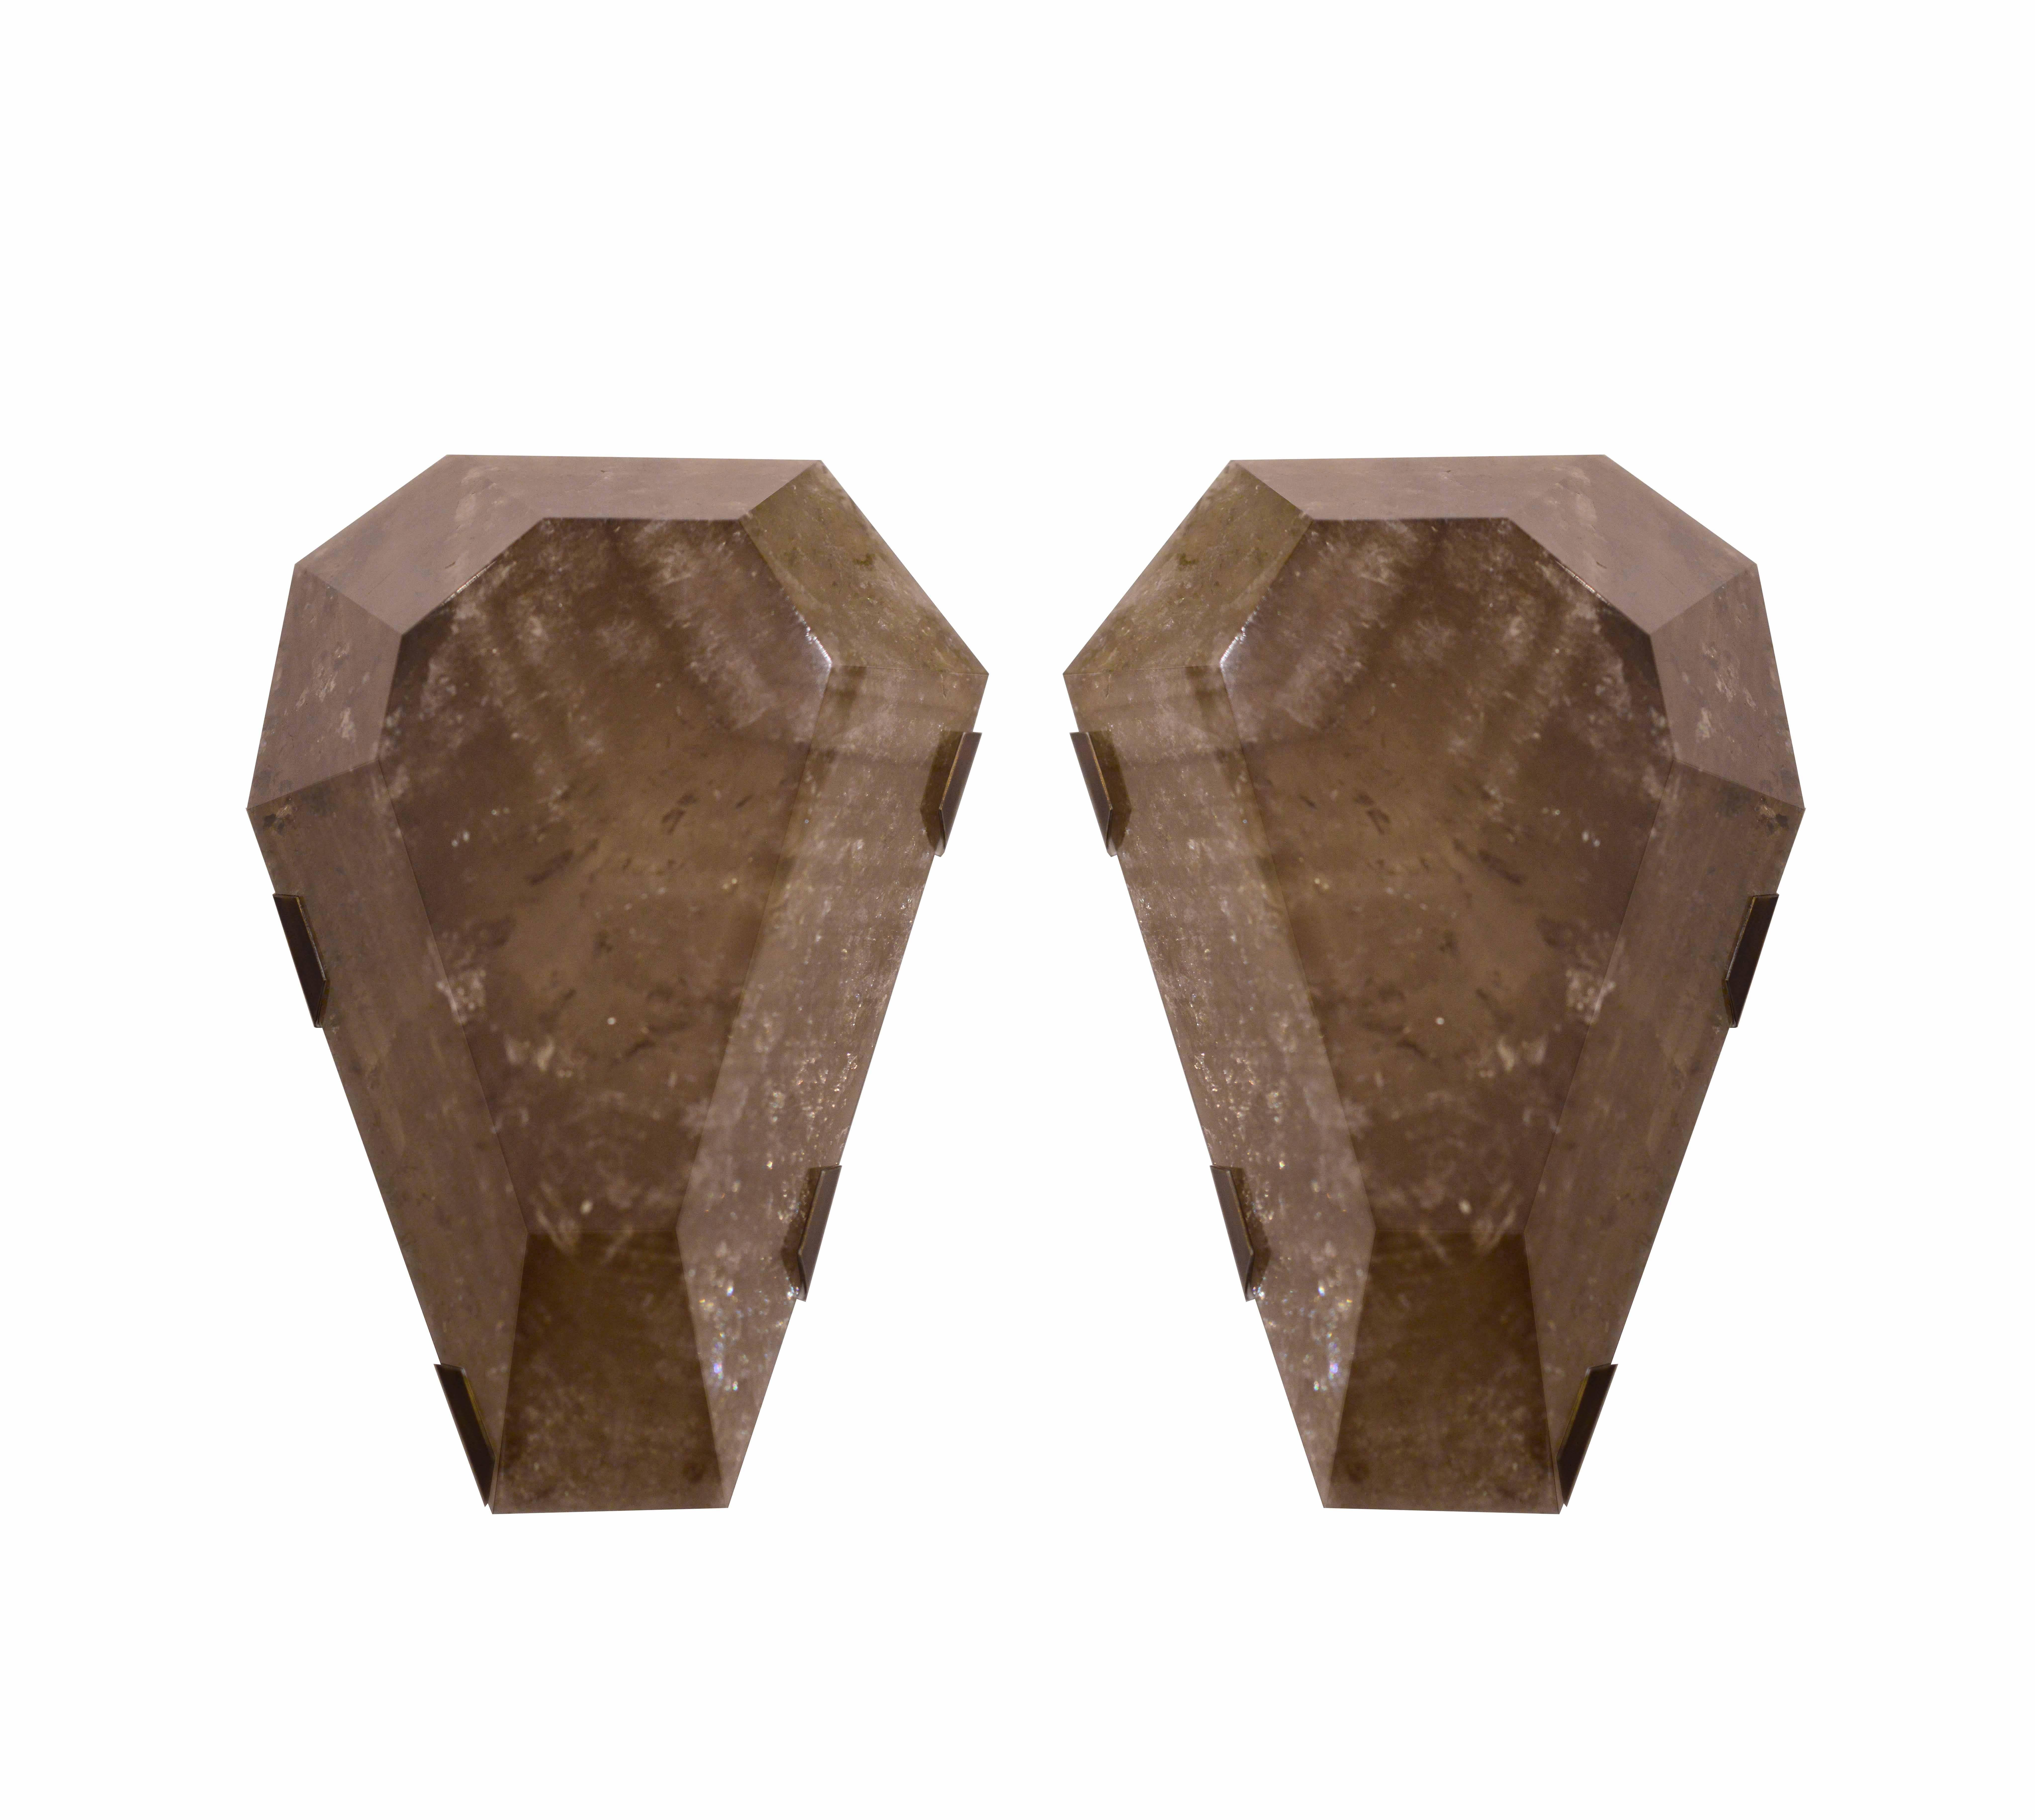 Pair of fine carved diamond form smoky brown rock crystal sconces with antique brass mount, created by Phoenix Gallery, NYC.
Each sconce has two sockets with candle light bulbs max of 120W.
Custom measurement and finish available. 
15 in/H x 11 in/W